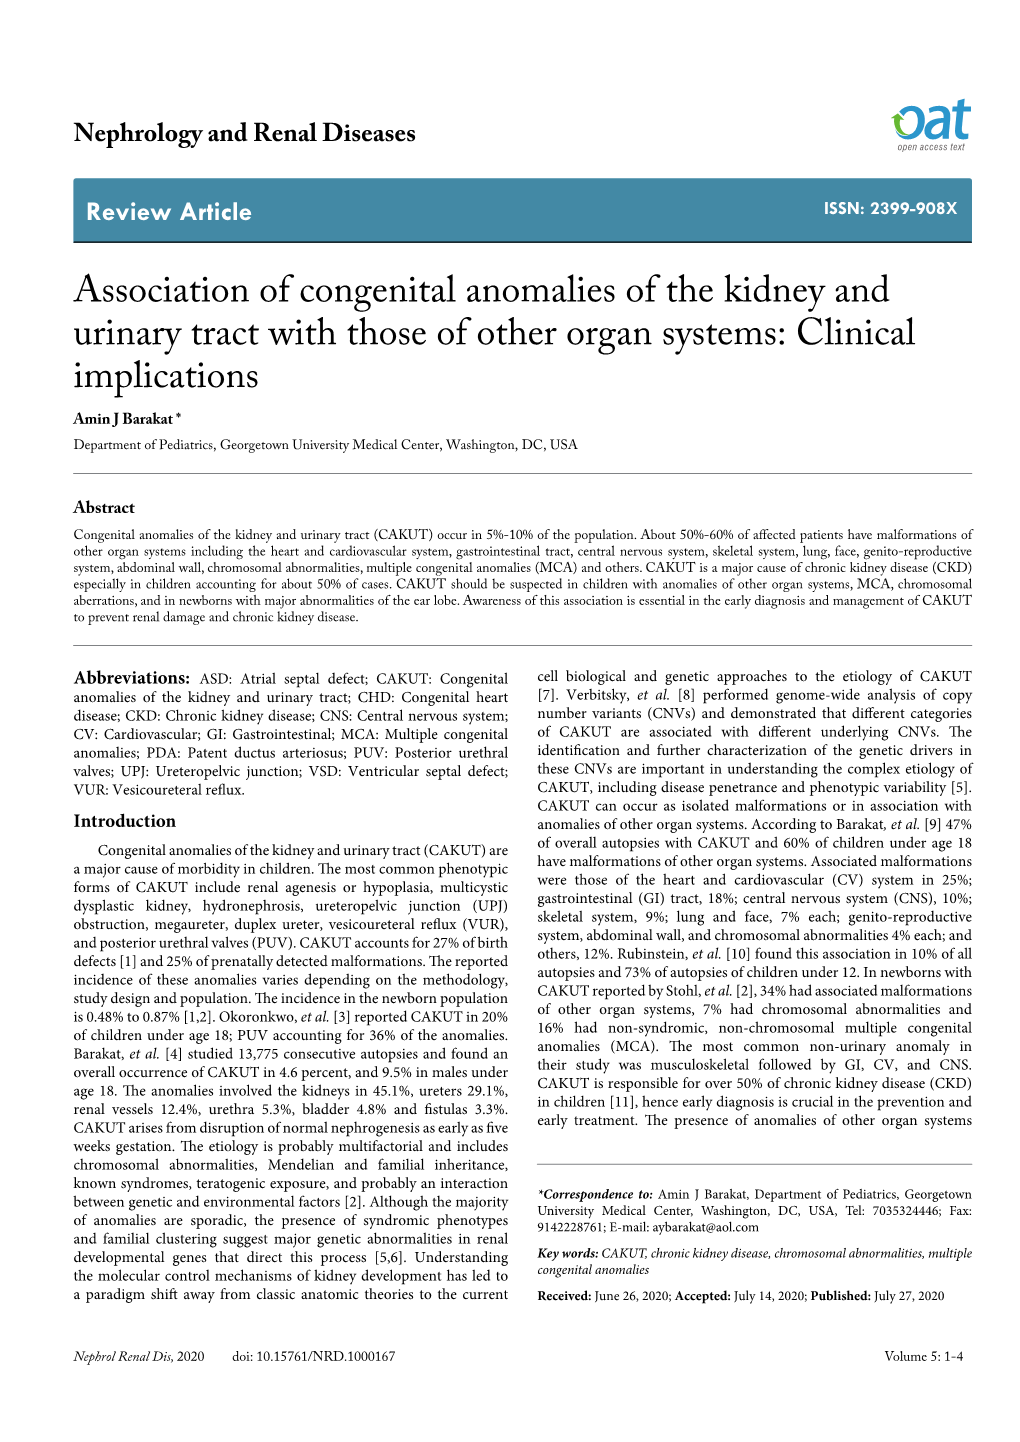 Association of Congenital Anomalies of the Kidney and Urinary